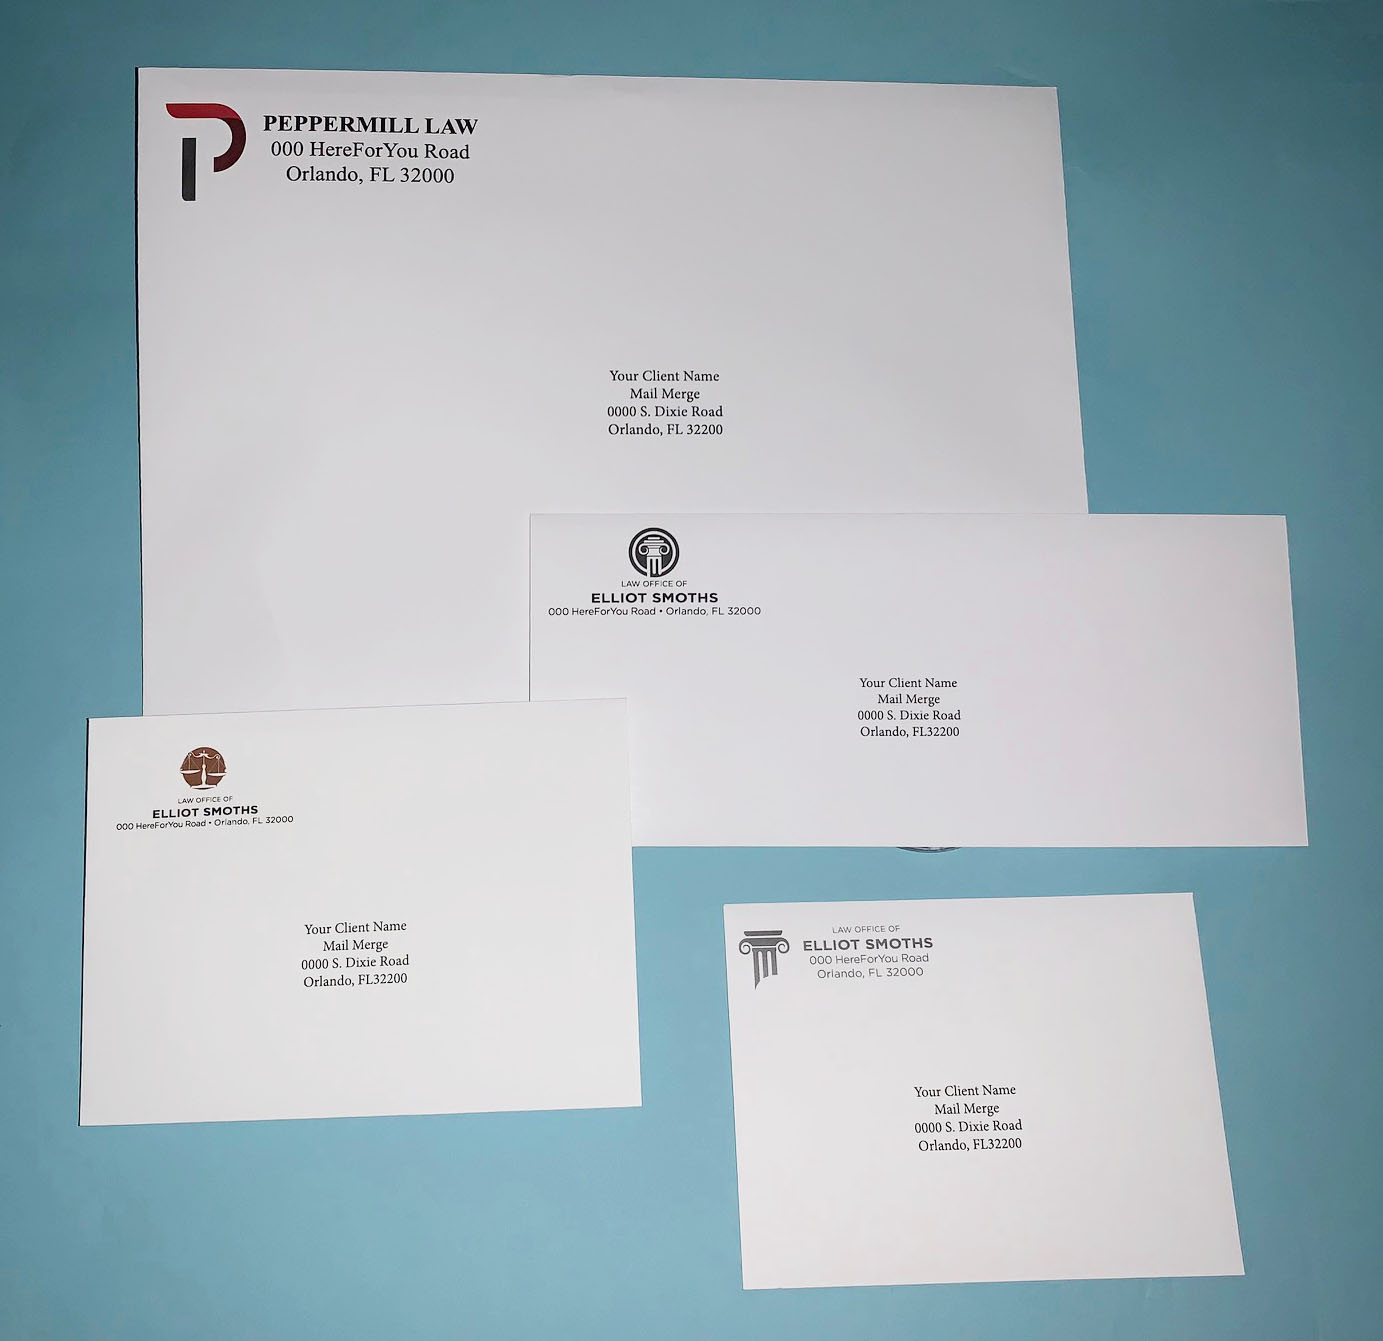 Personalized, Pre-addressed Envelopes